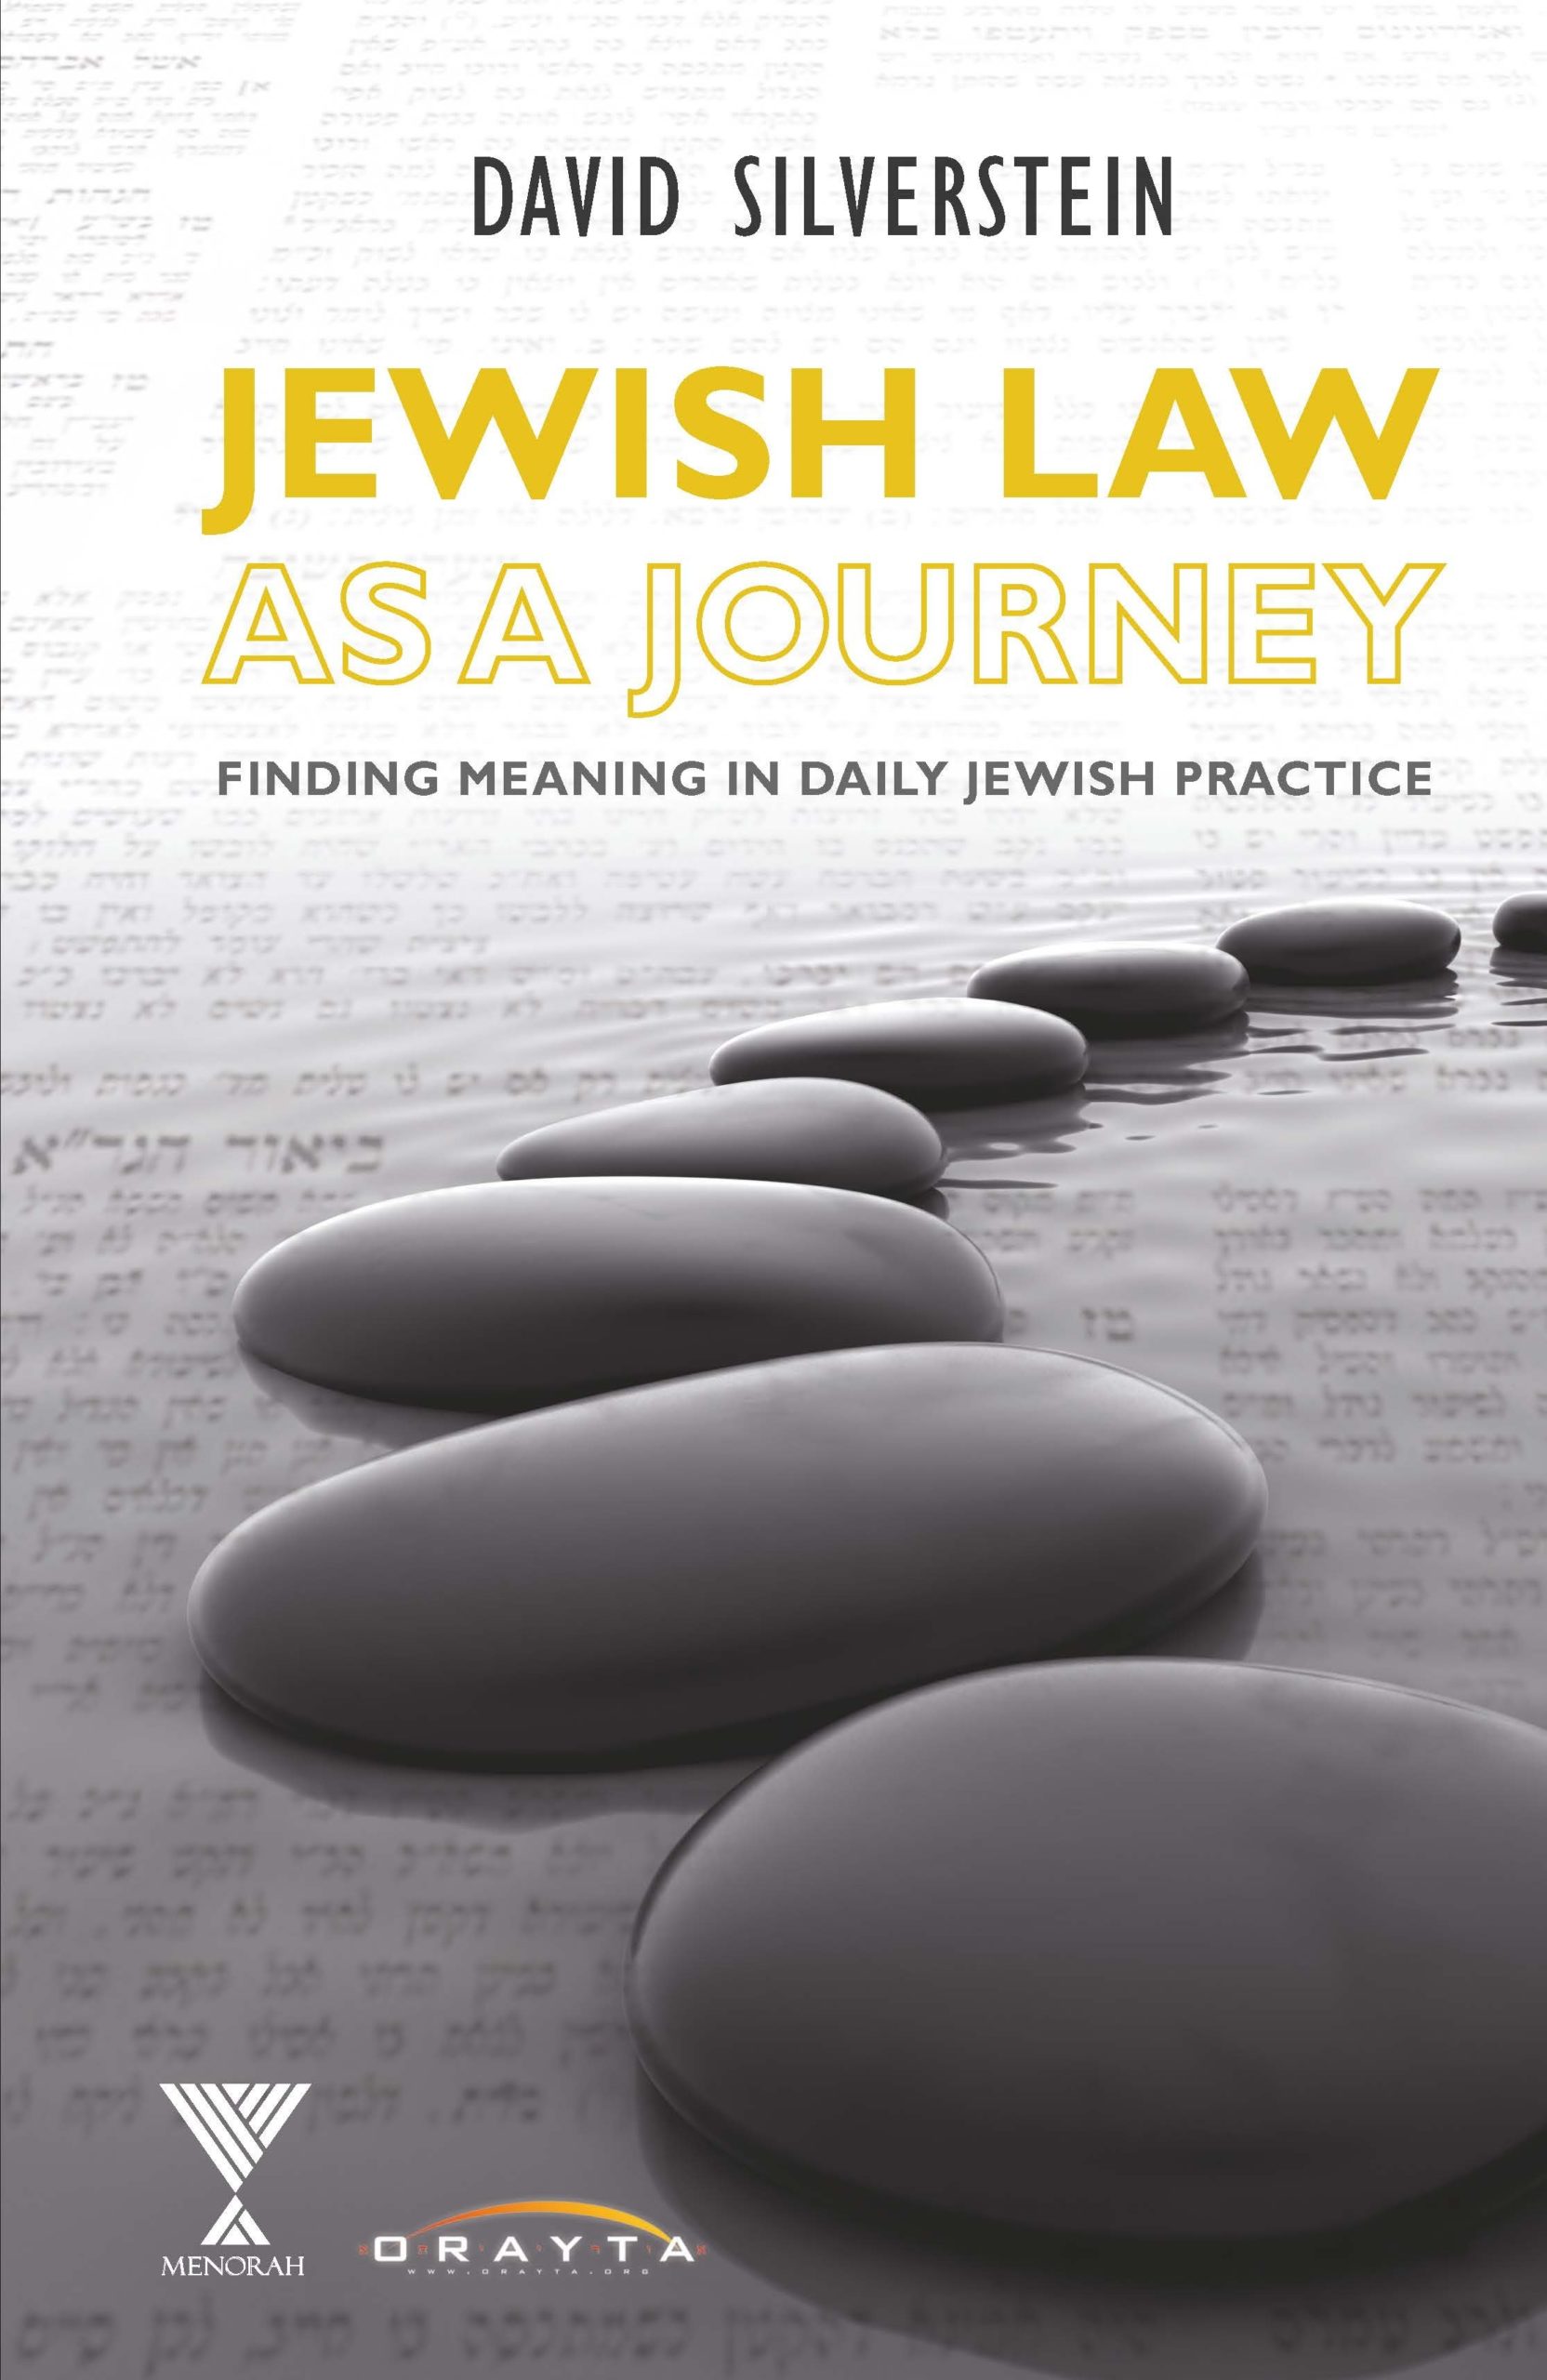 Jewish Law As A Journey Cover Final Scaled 1.jpg